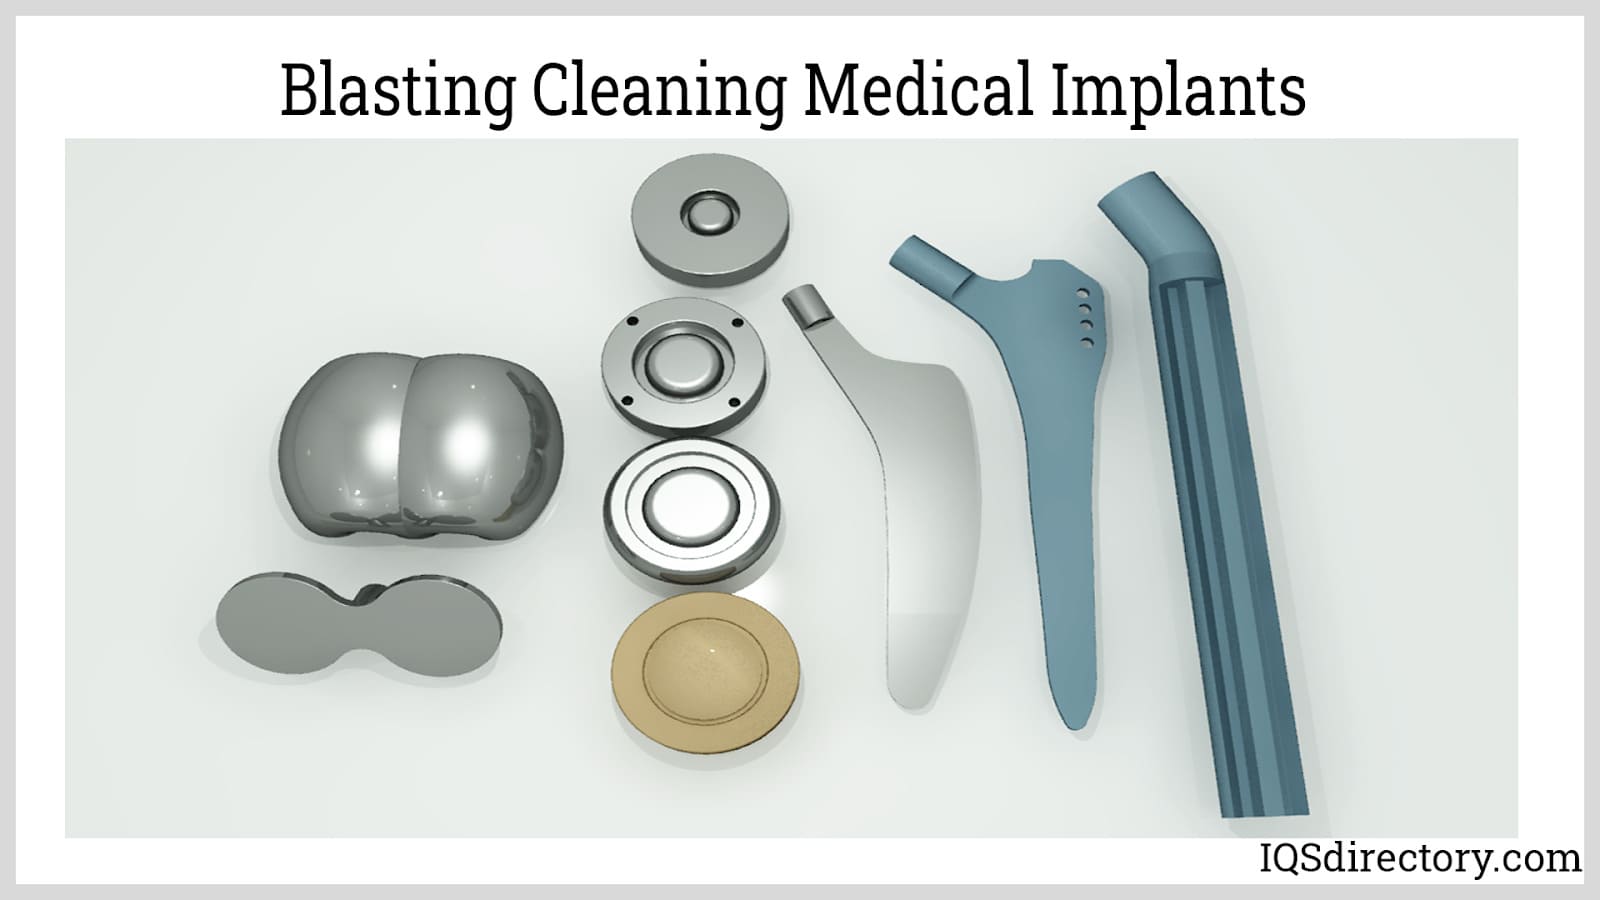 Blasting Cleaning Medical Implants